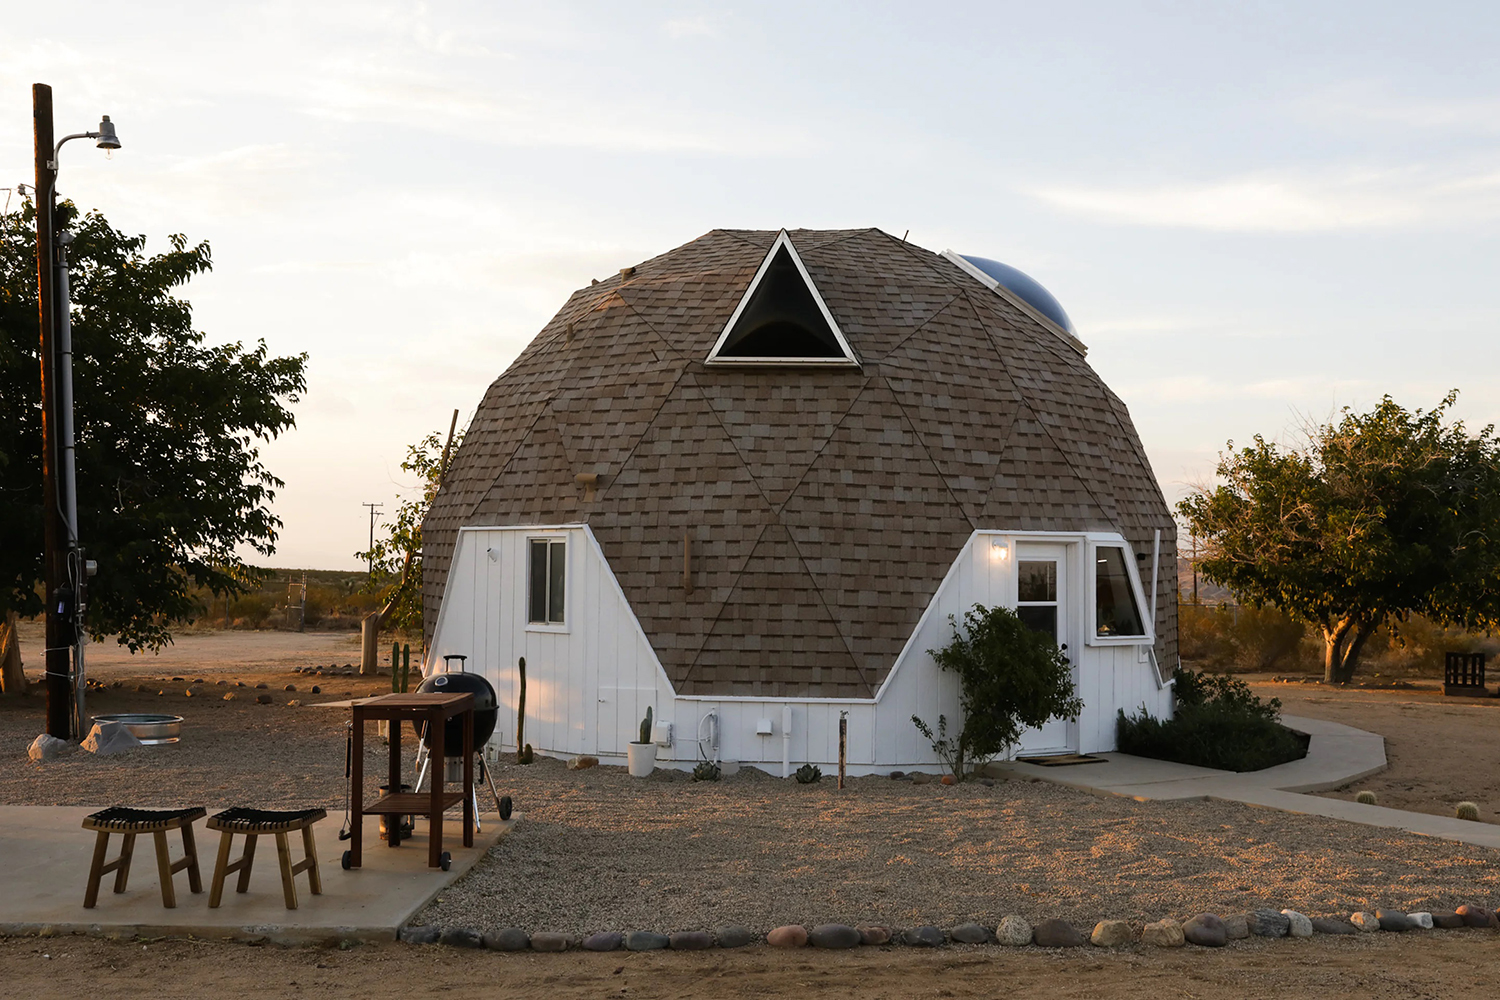 Exterior view of a geodesic vacation rental called Abracadabra Dome near Joshua Tree National Park, California.